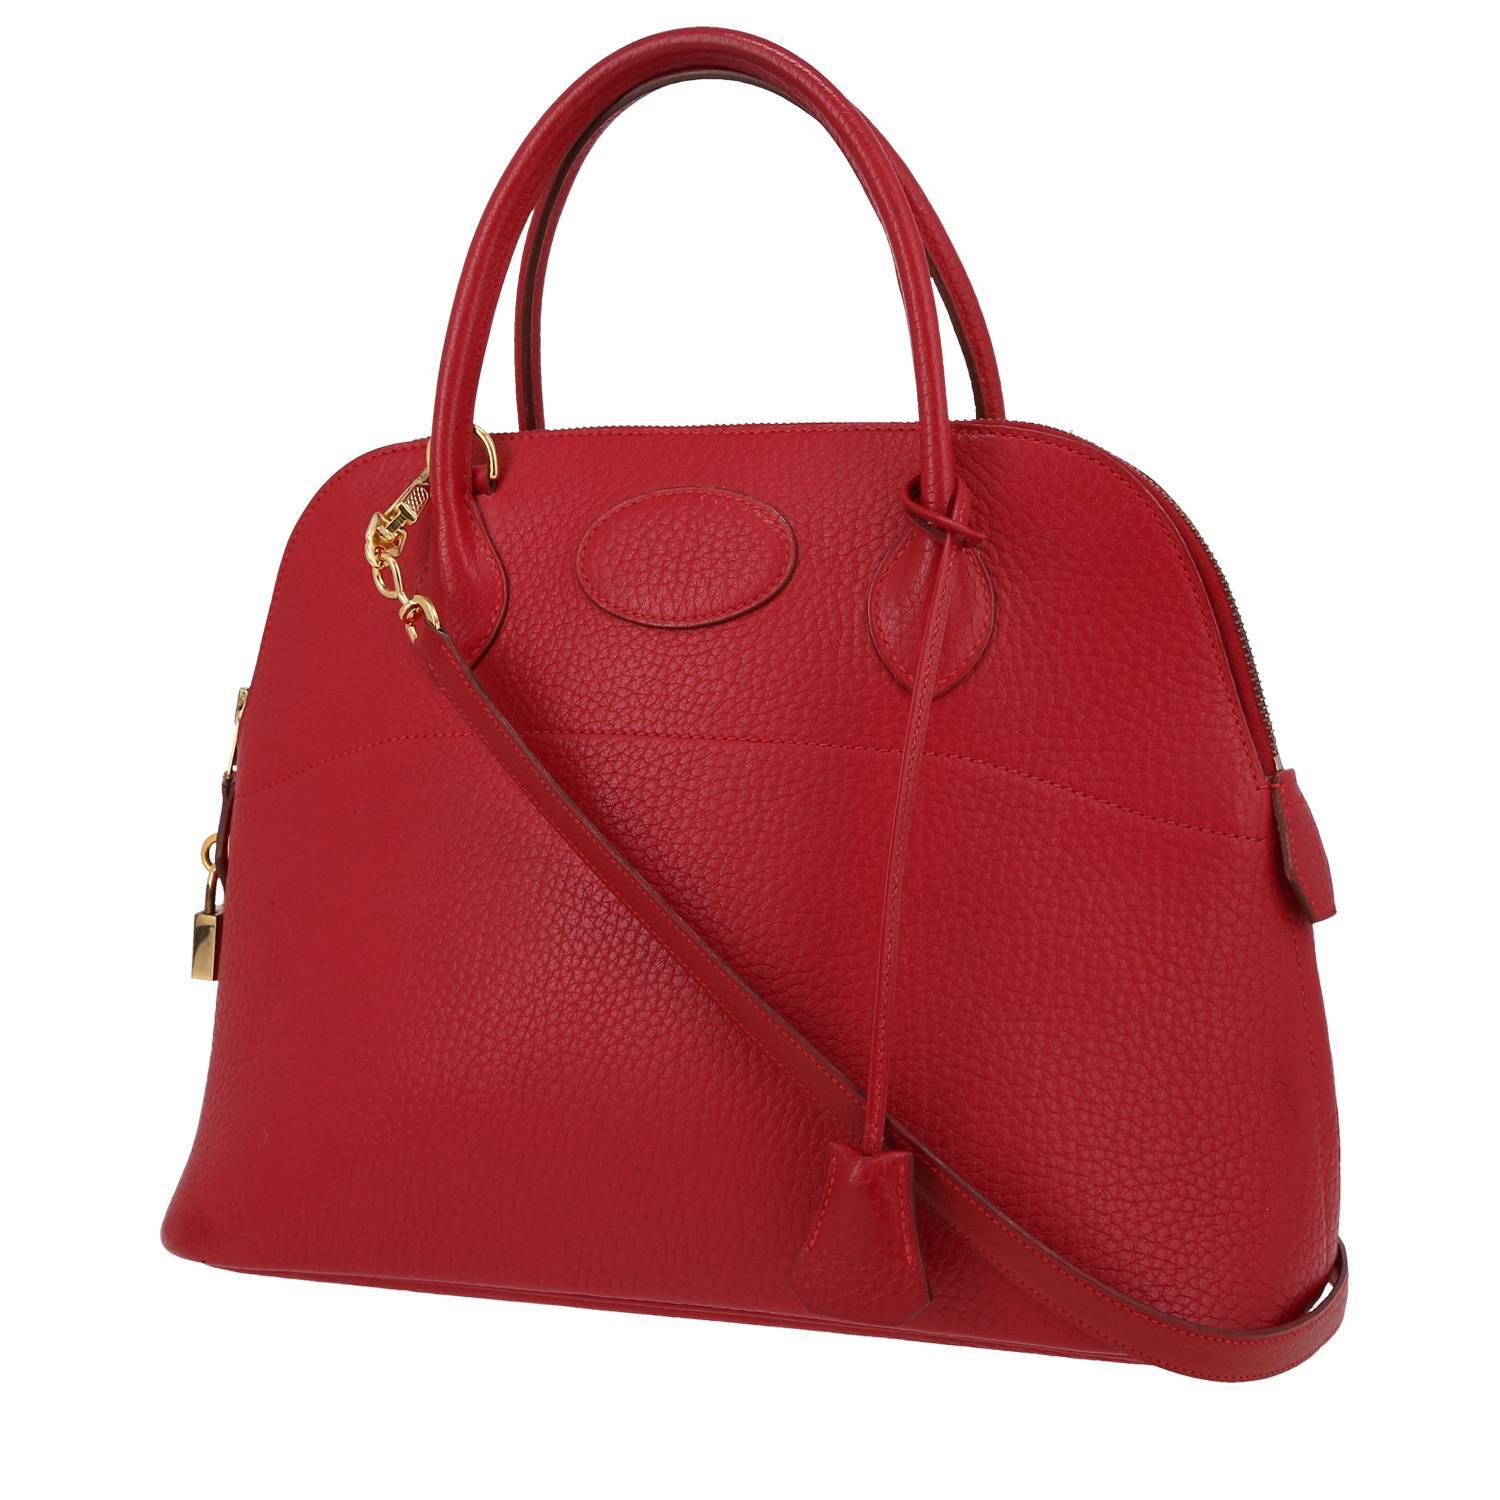 Hermes Bolide 37 cm handbag in red Casaque Courchevel leather